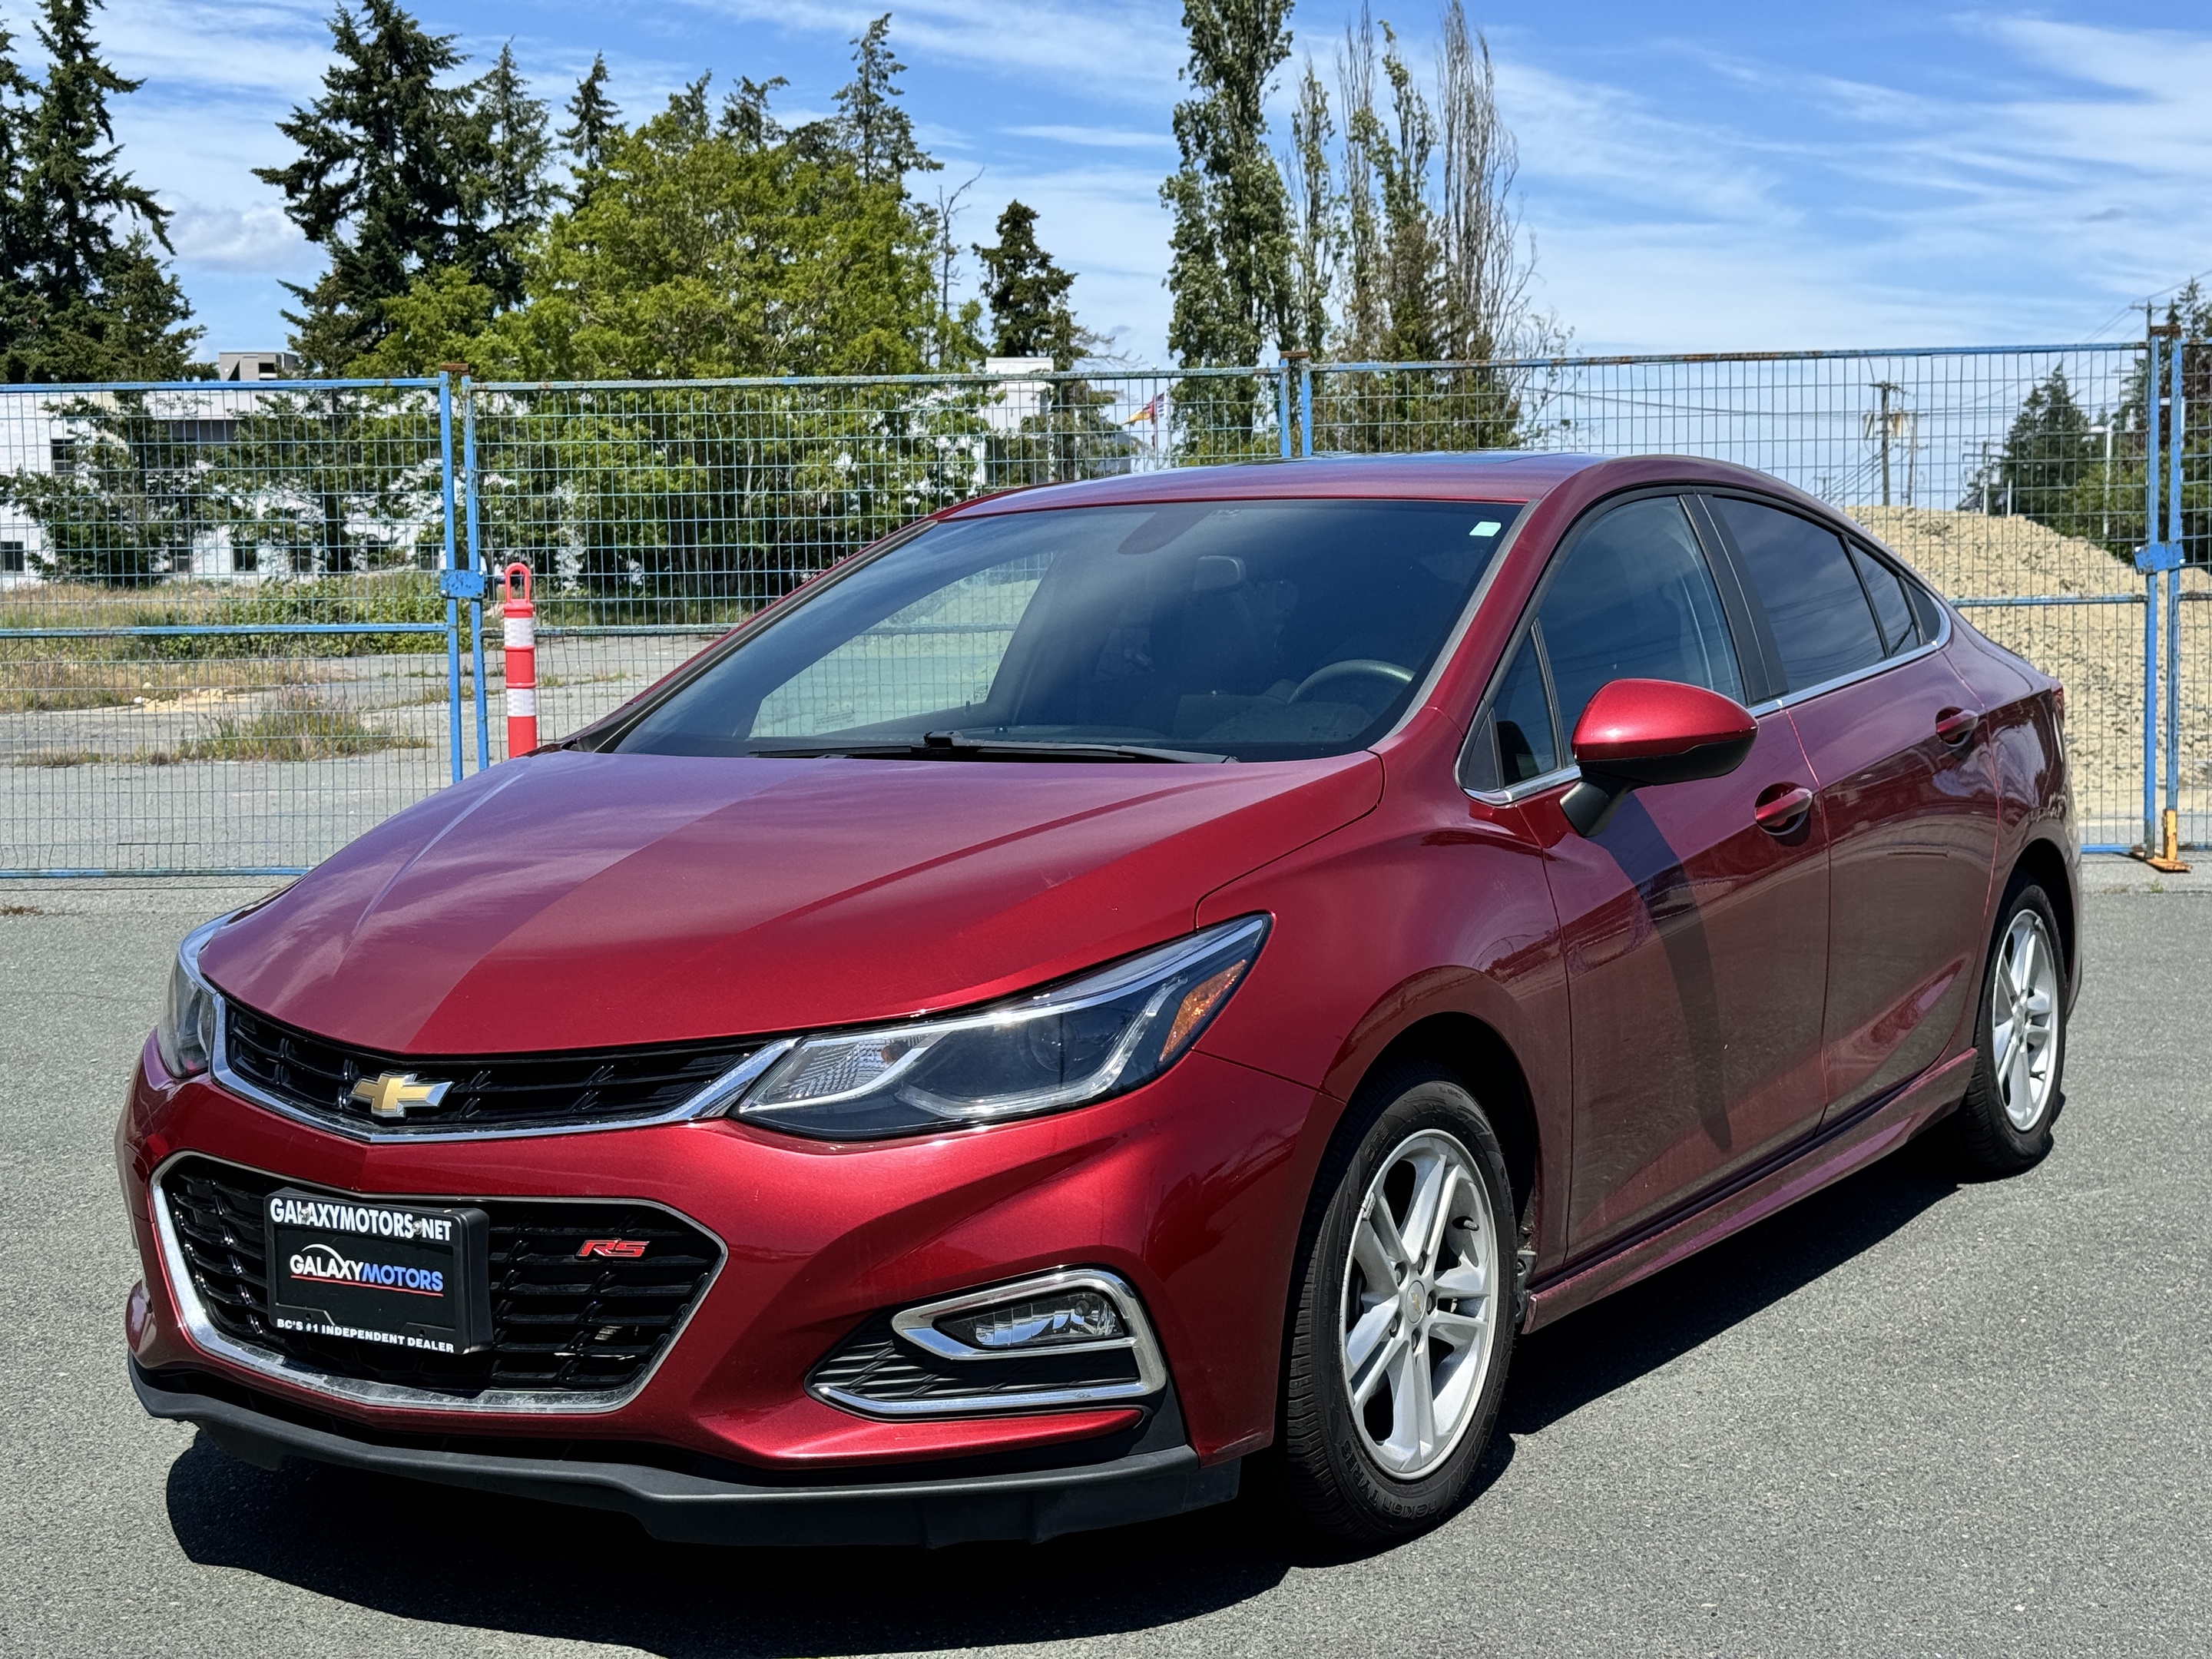 2018 Chevrolet Cruze LT FWD-Air Conditioning,Heated Seats,SiriusXM 